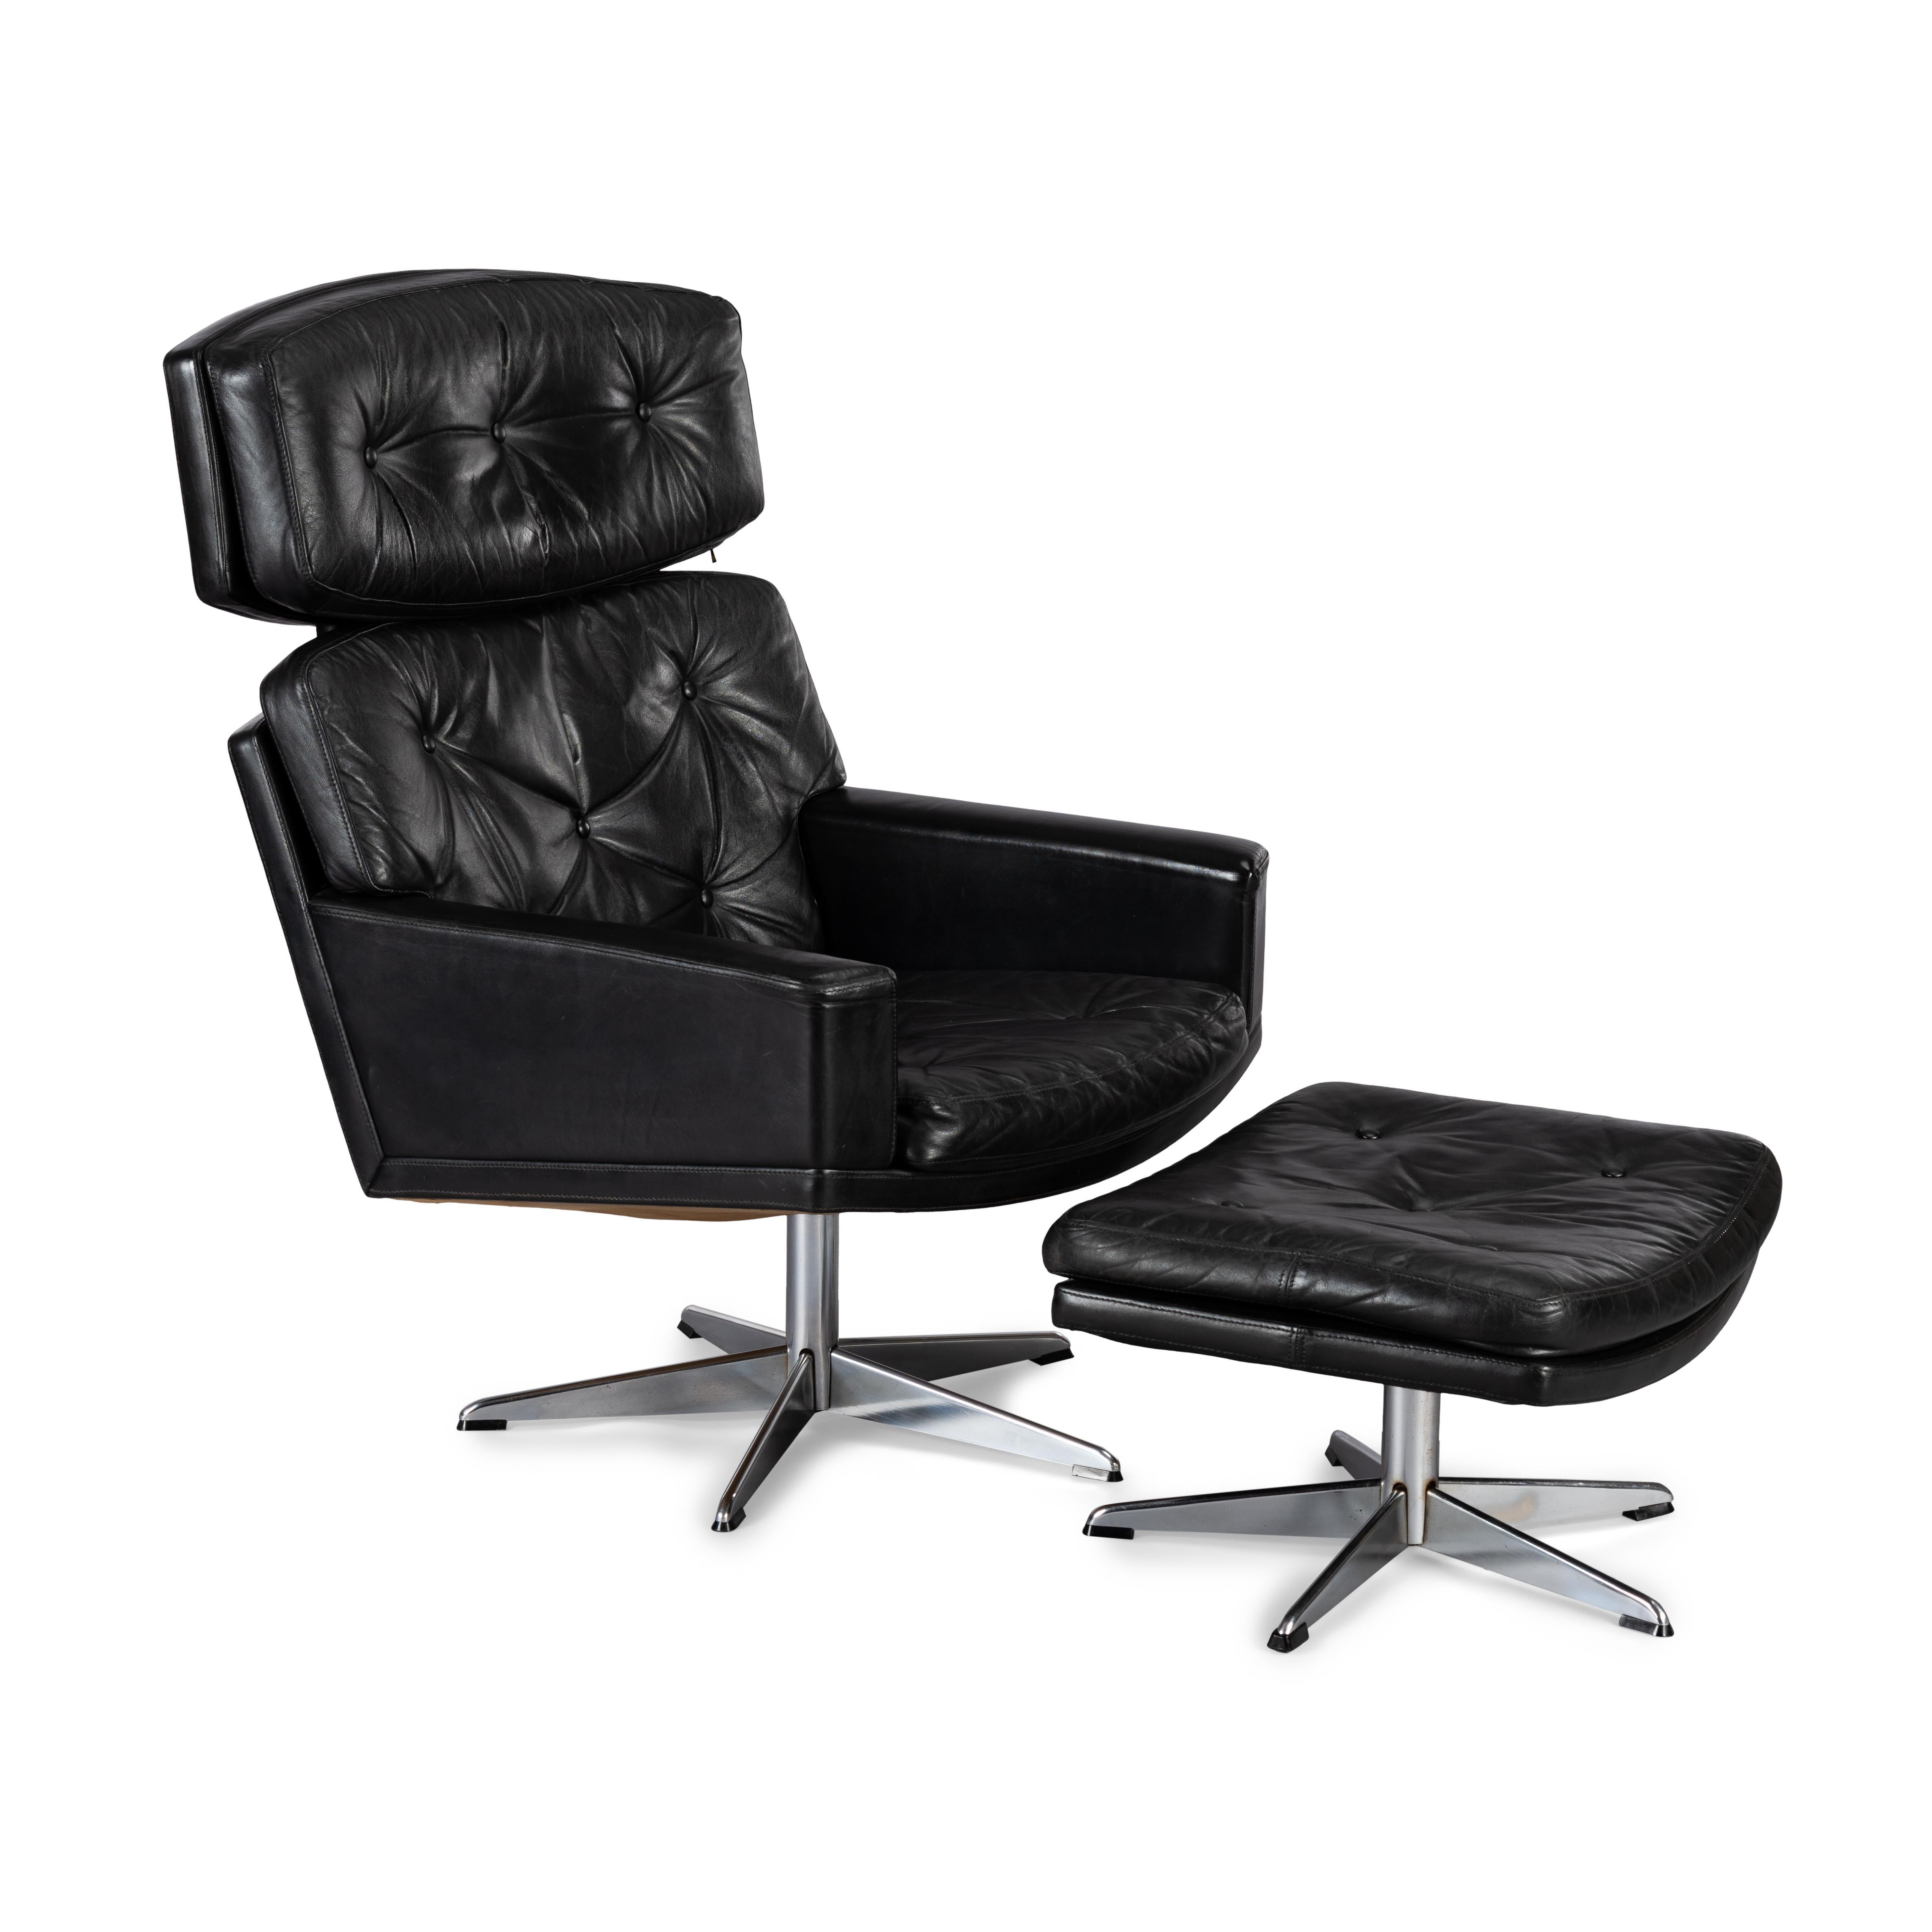 Mid-Century Modern black leather and chromed metal Danish 'Pappa' swivel chair and ottoman that will make Rob Halford drool. A 'Mama' swivel chair and a four person 'room for everyone' sofa are also separately available. All is still in fully